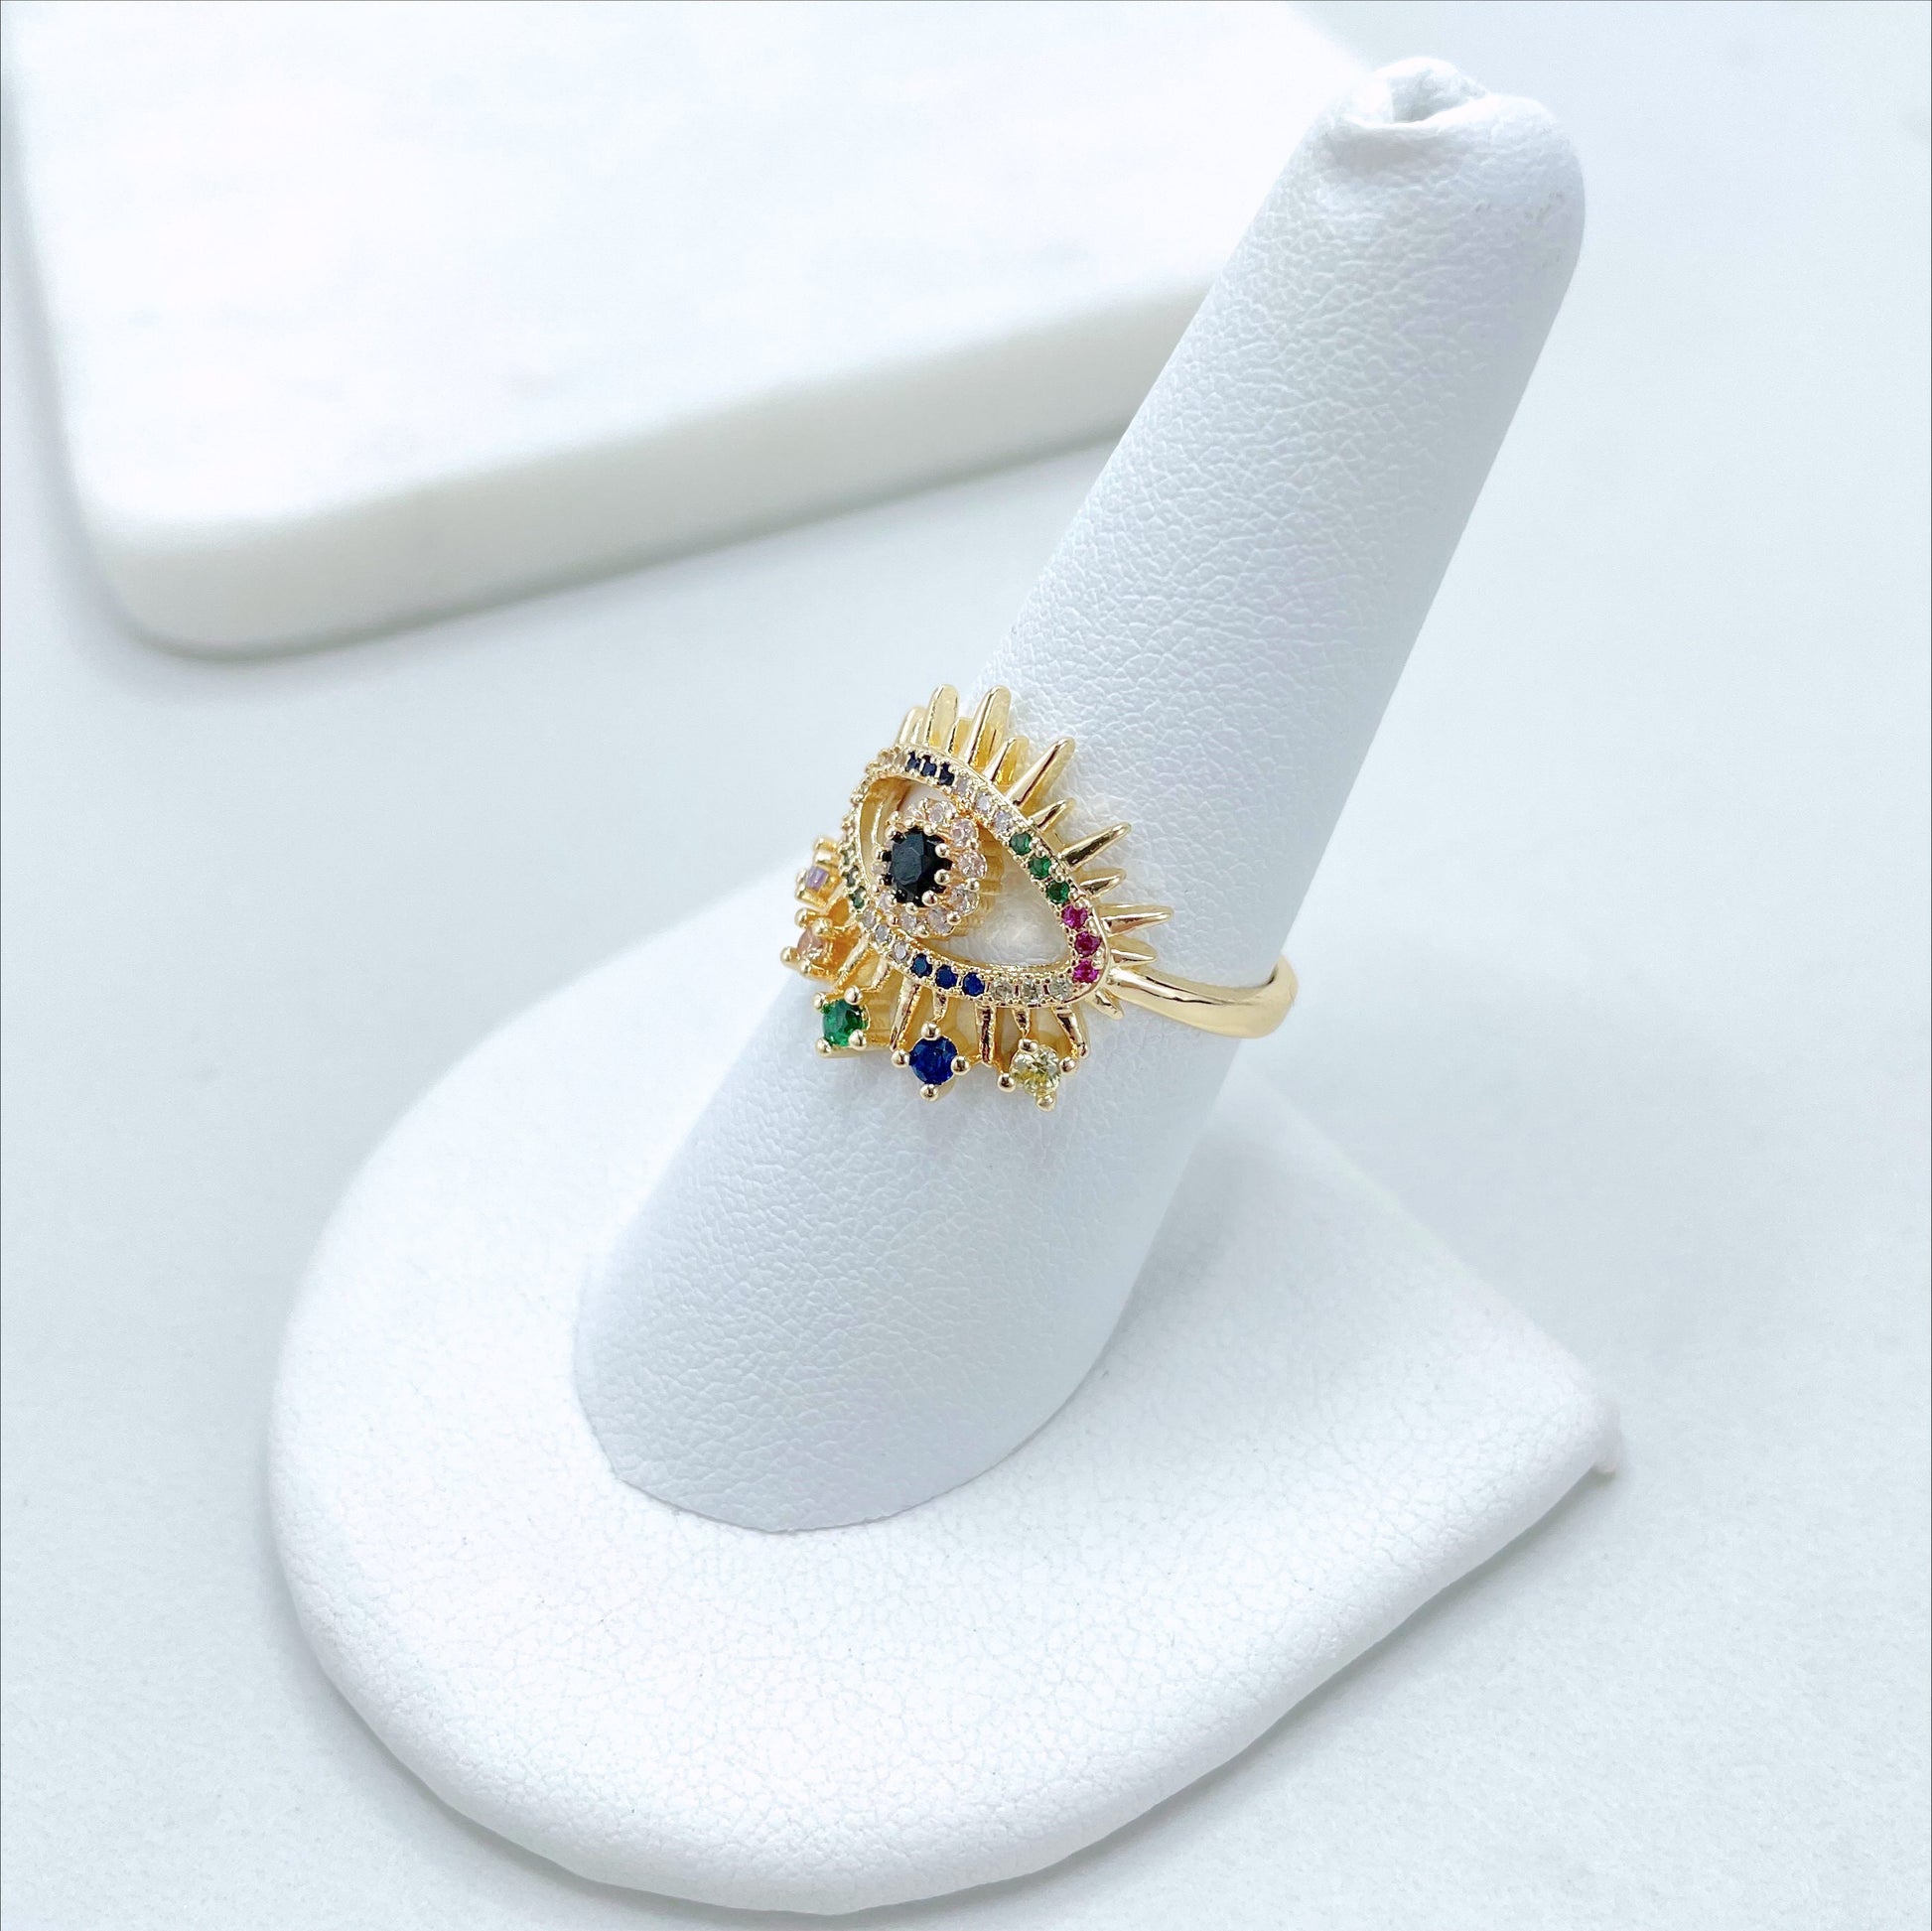 18k Gold Filled Evil Eyes Shape Statement Ring Featuring with Colored Rainbow Micro CZ and CZ, Wholesale Jewelry Making Supplies